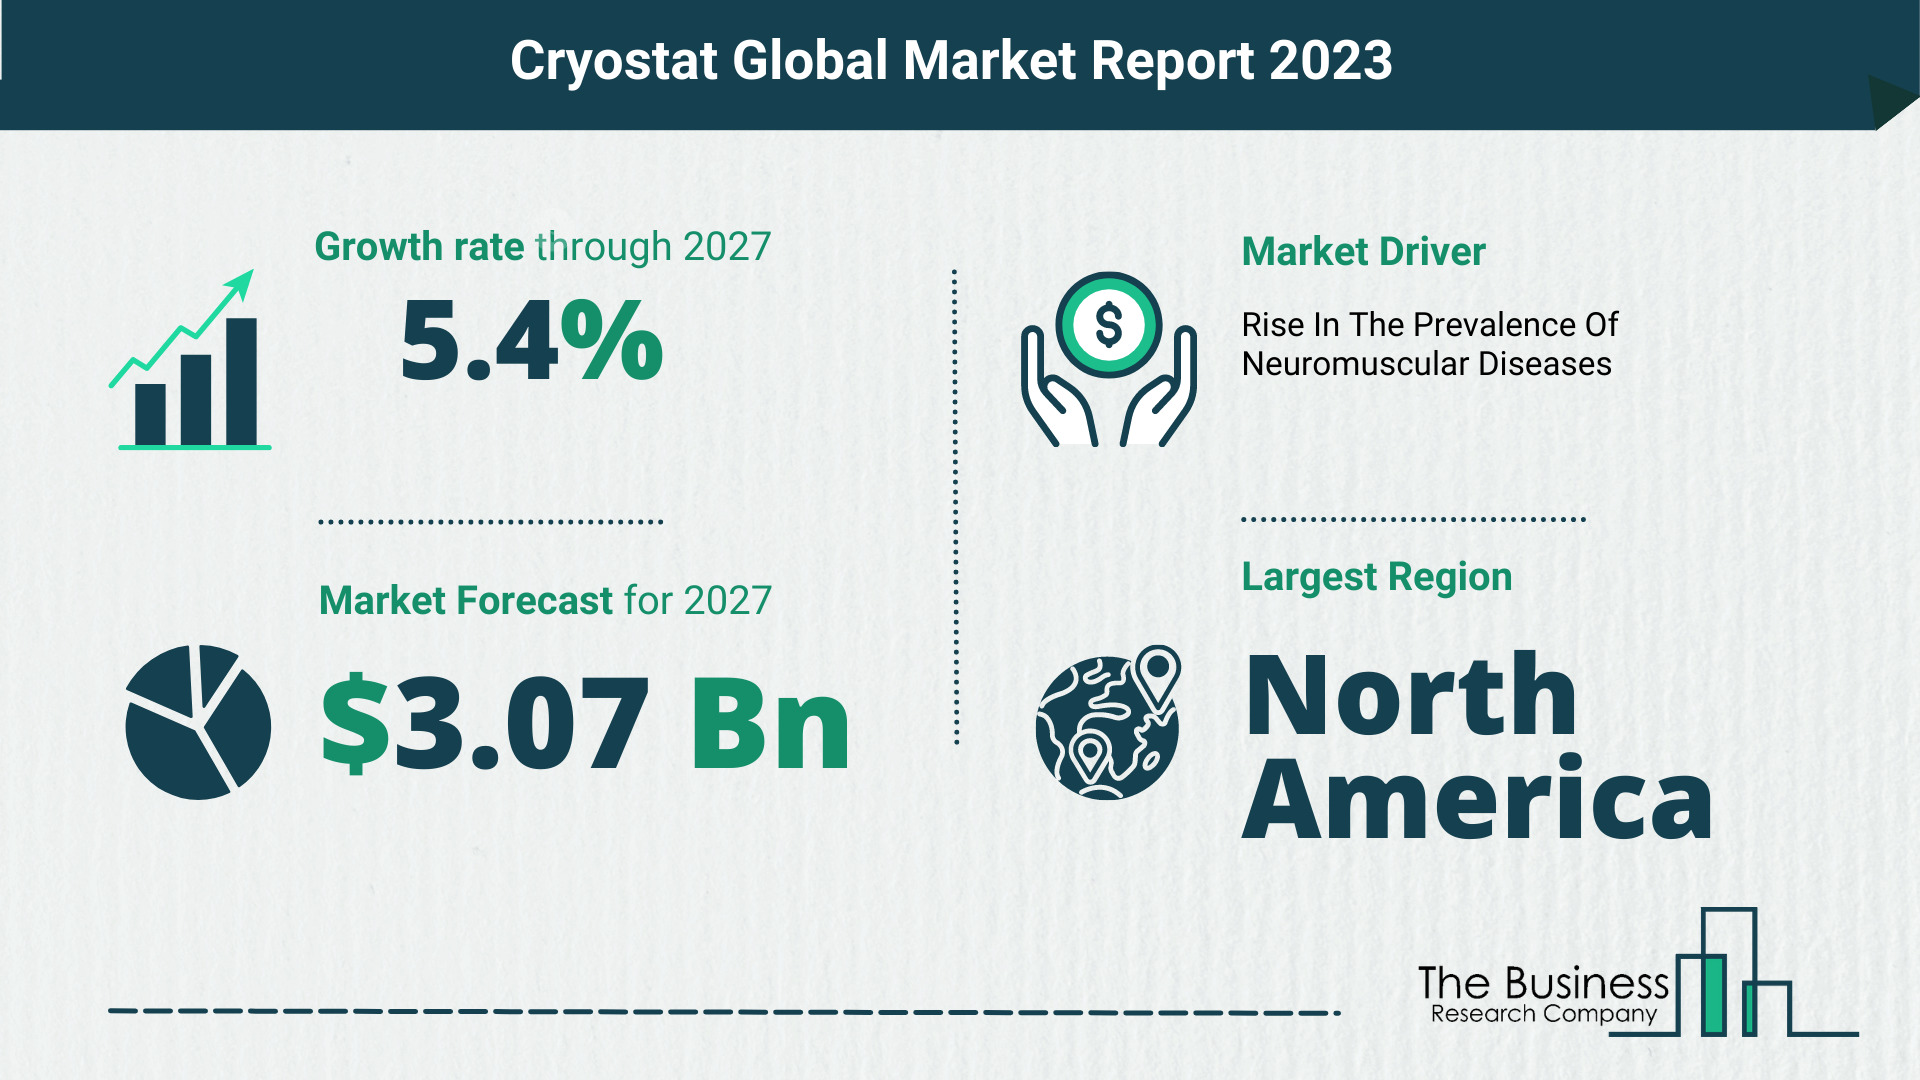 Global Cryostat Market Opportunities And Strategies 2023